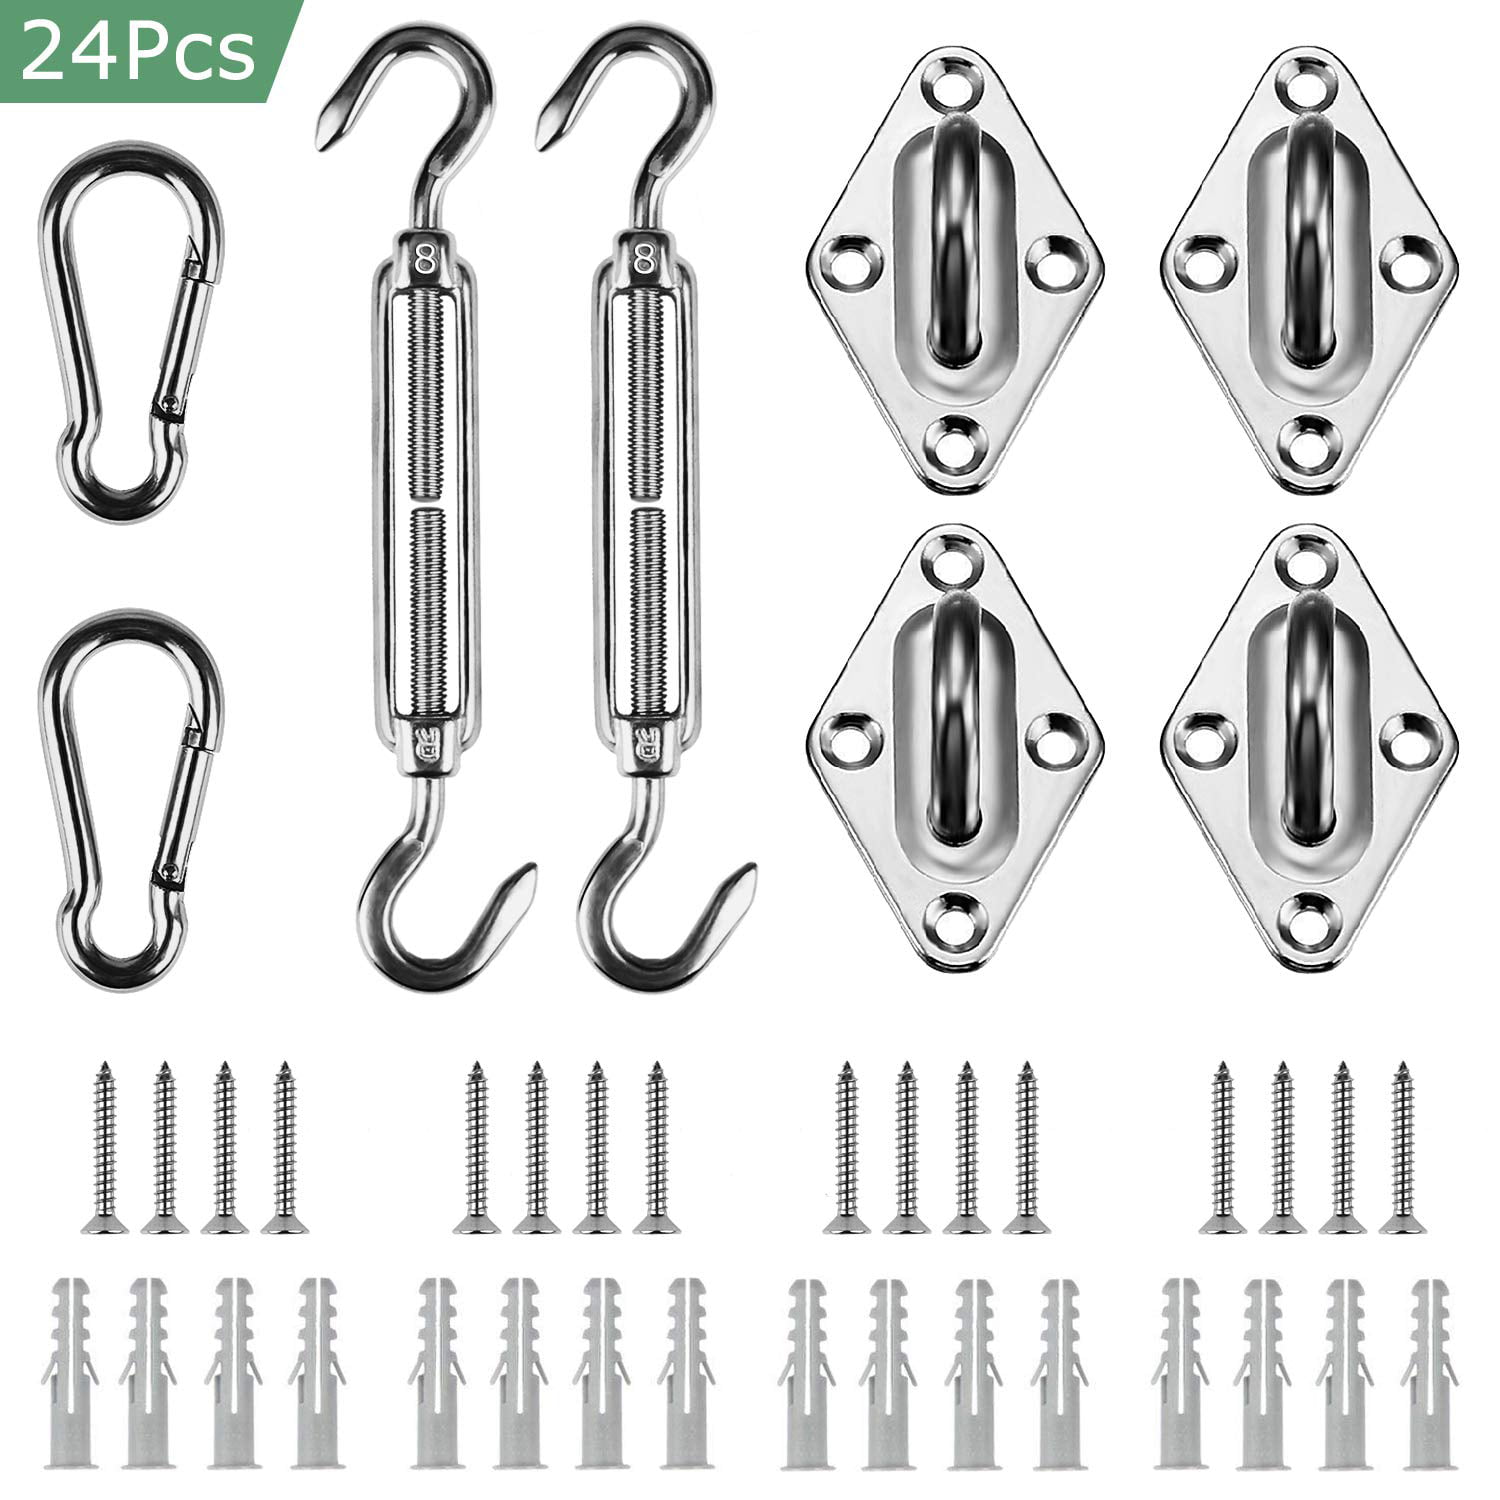 COITEK 8 inch Shade Sail Hardware Kit 40 PCS 304 Stainless Steel Sun Shade Sail Fixing Kit for Garden Triangle and Square Rectangle